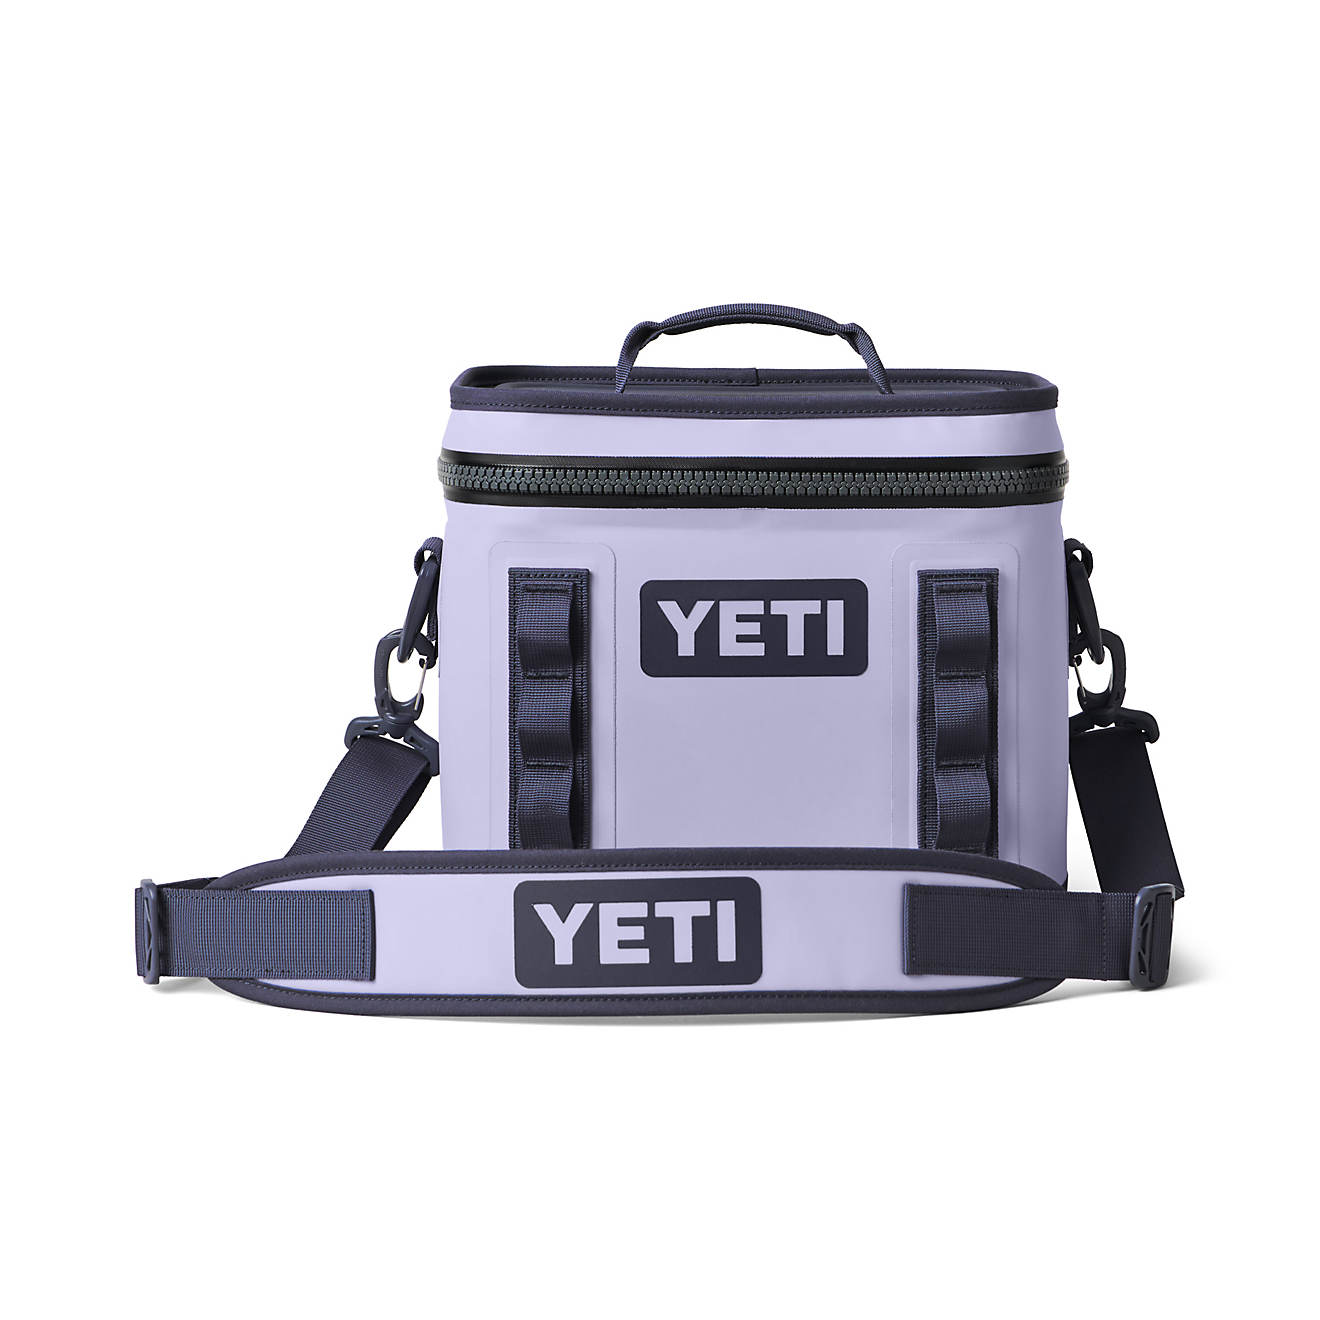 https://academy.scene7.com/is/image/academy//coolers/yeti-hopper-flip-8-soft-cooler-18060131200-purple/2120063e76af4e3d9ad148a150c1a5fe?$pdp-gallery-ng$